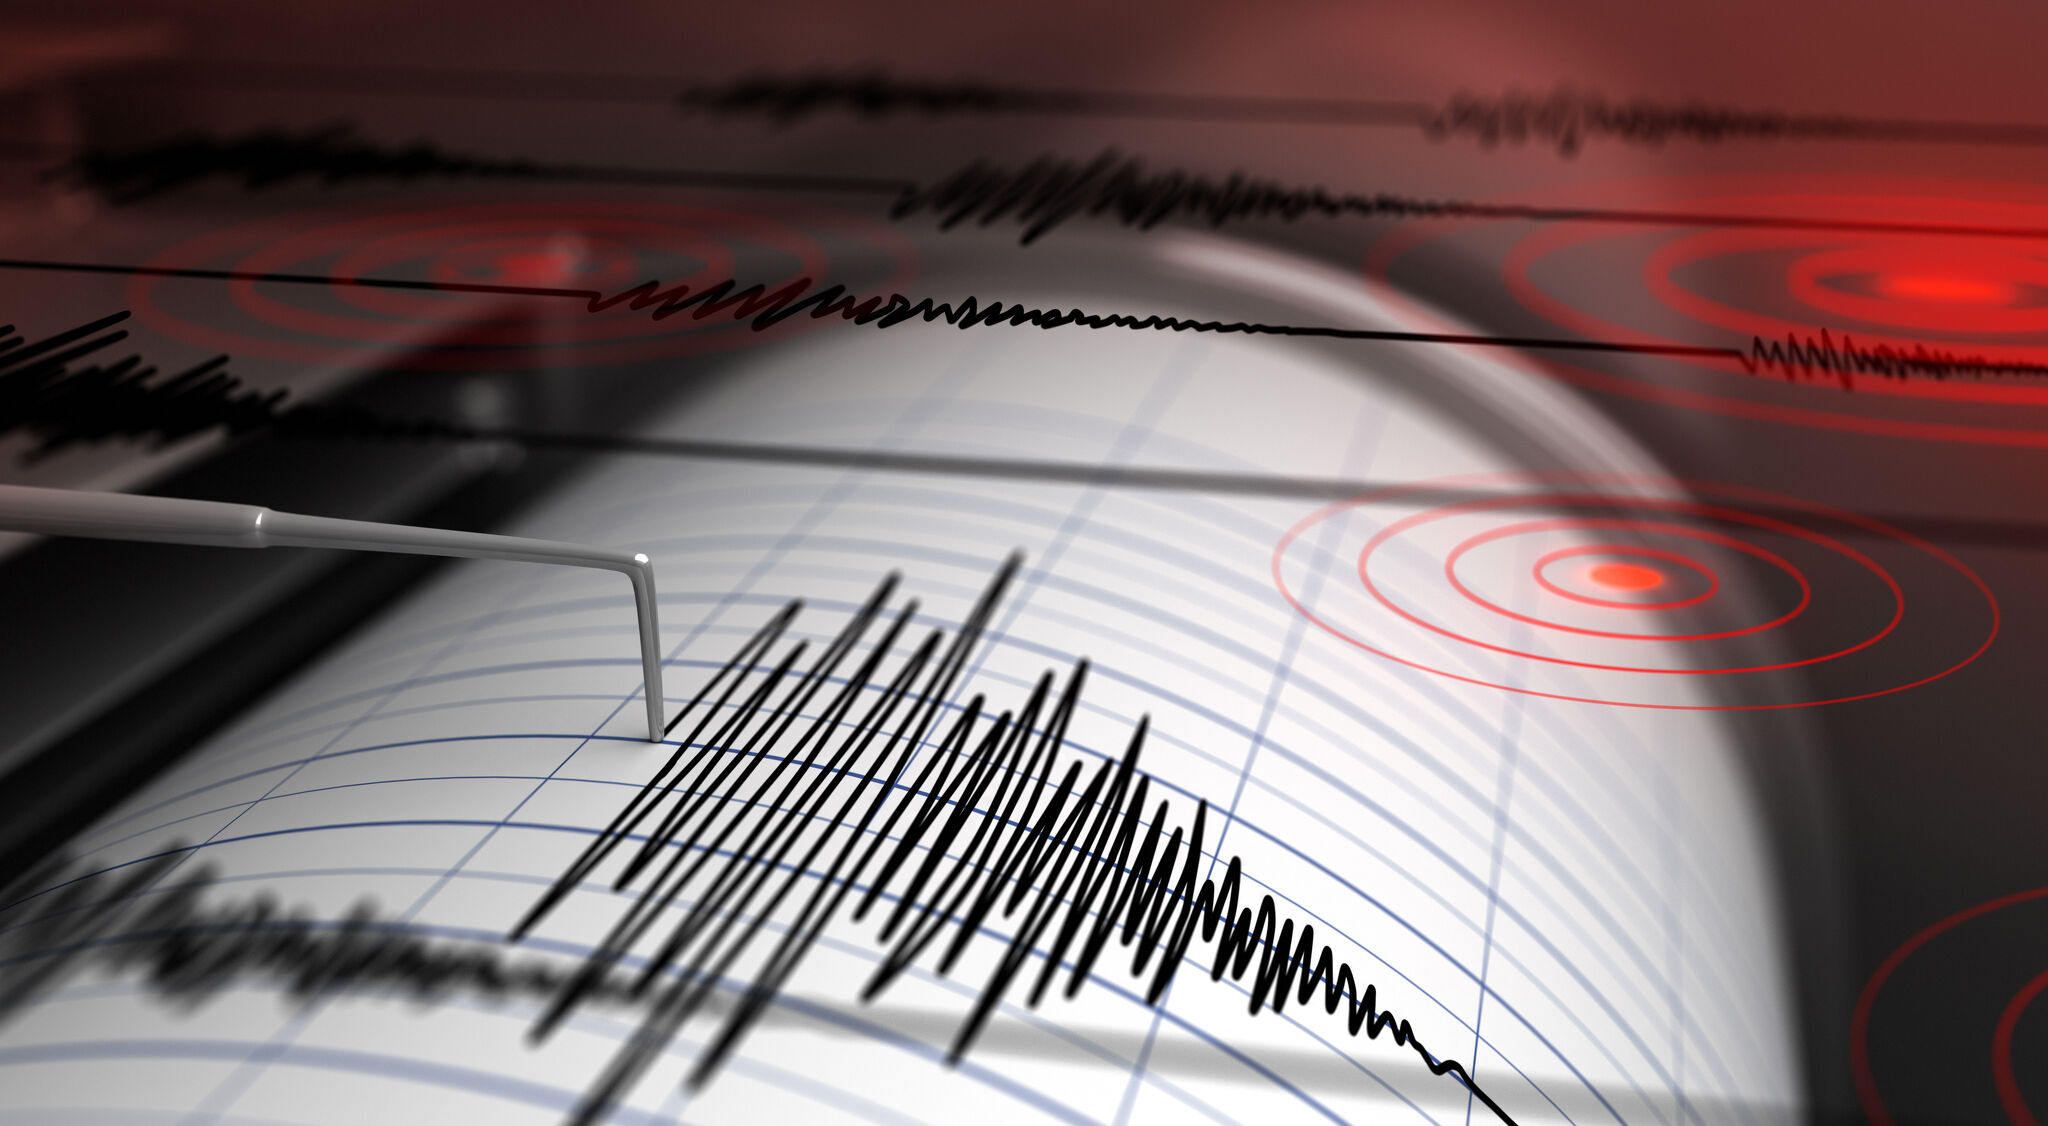  Things to know ... about the 5.4-magnitude quake near Midland 